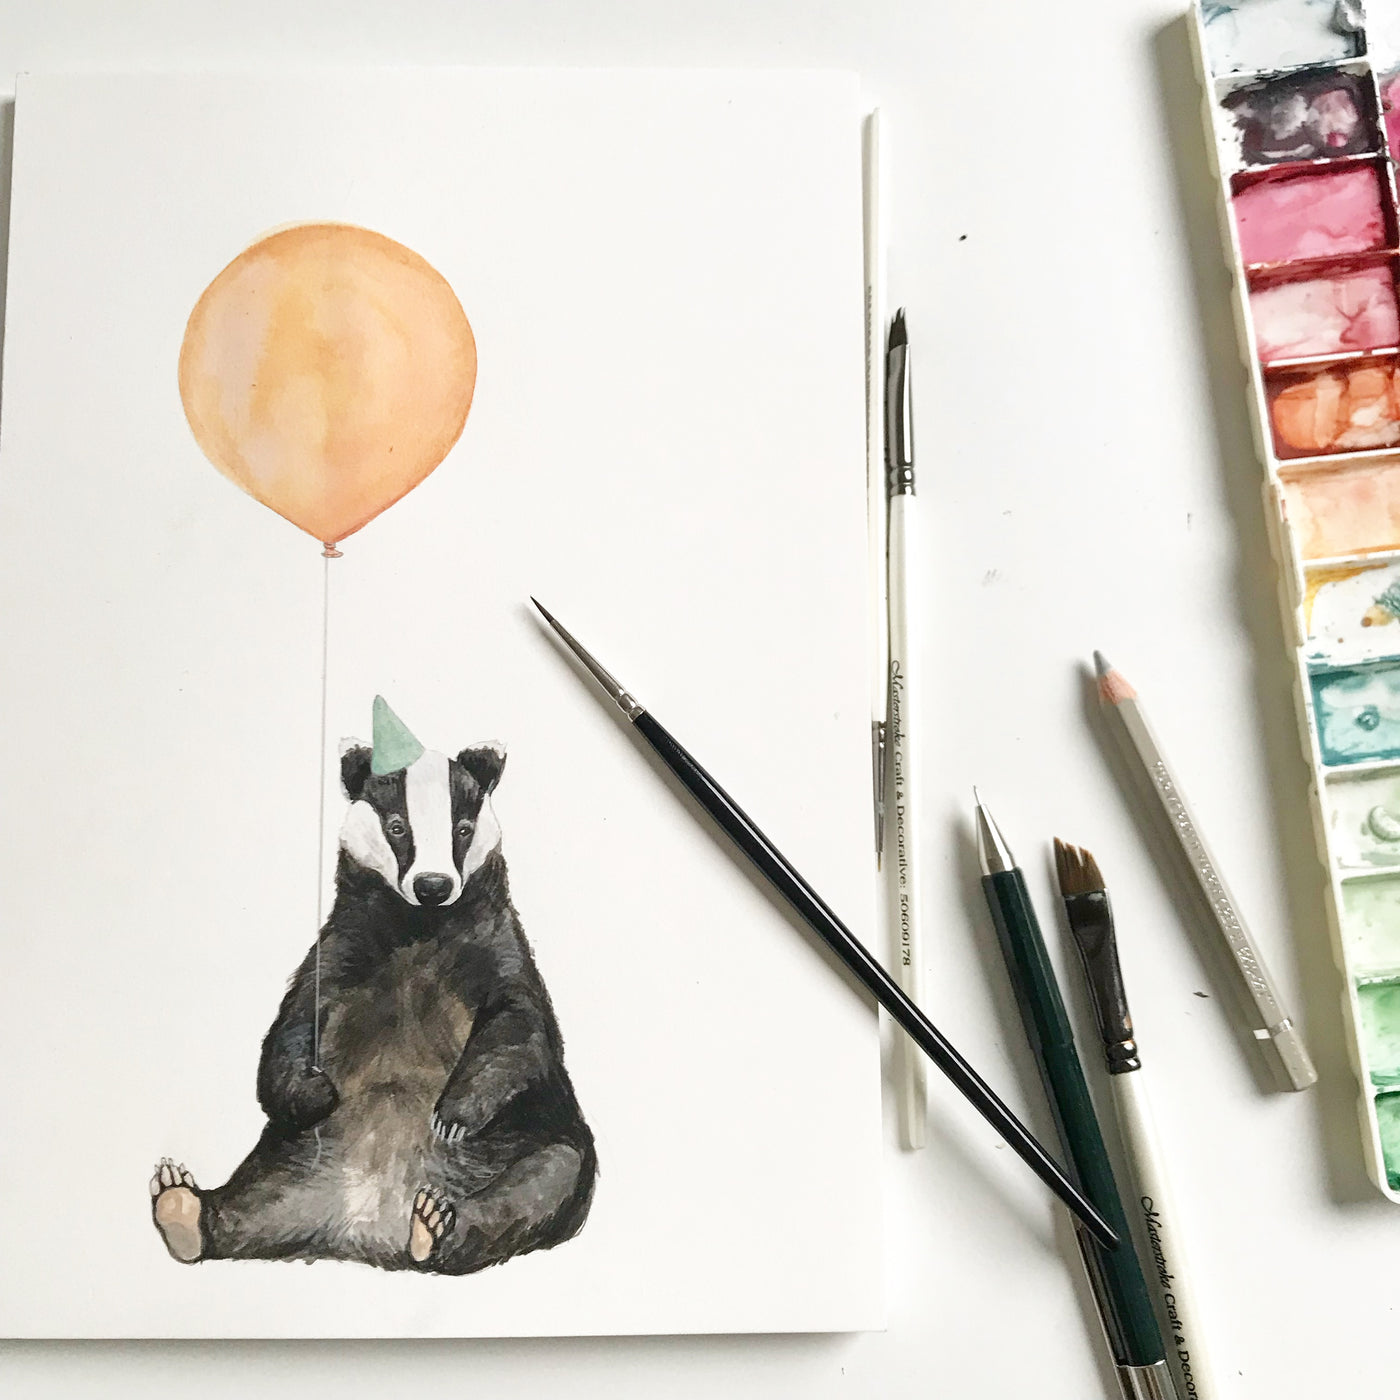 Hand painted badger with balloon illustration